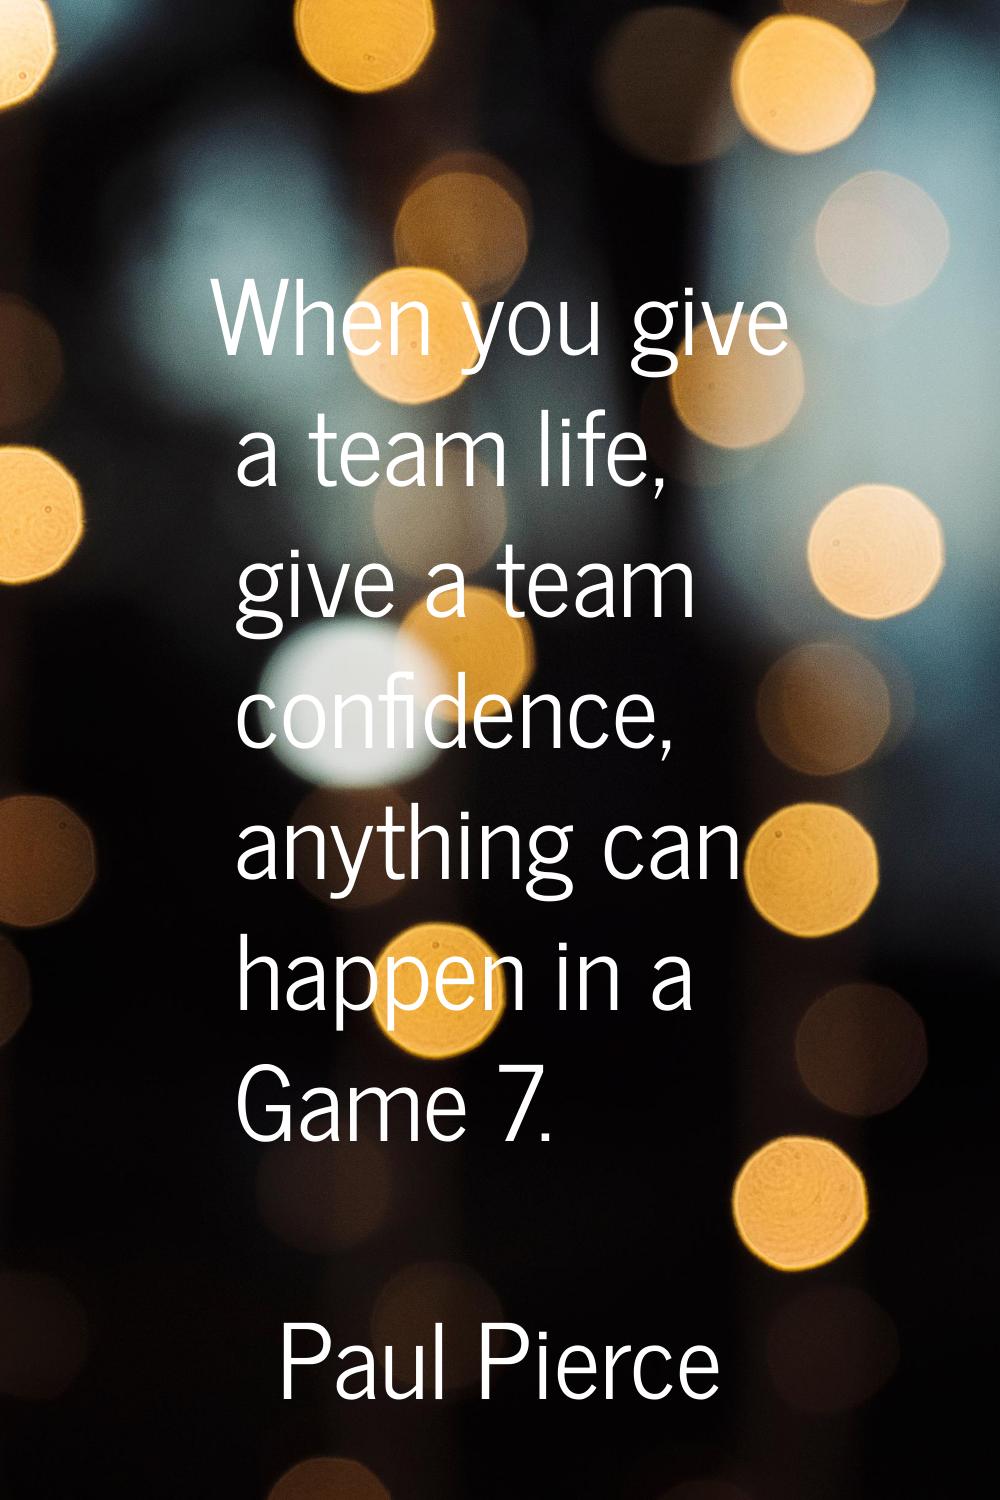 When you give a team life, give a team confidence, anything can happen in a Game 7.